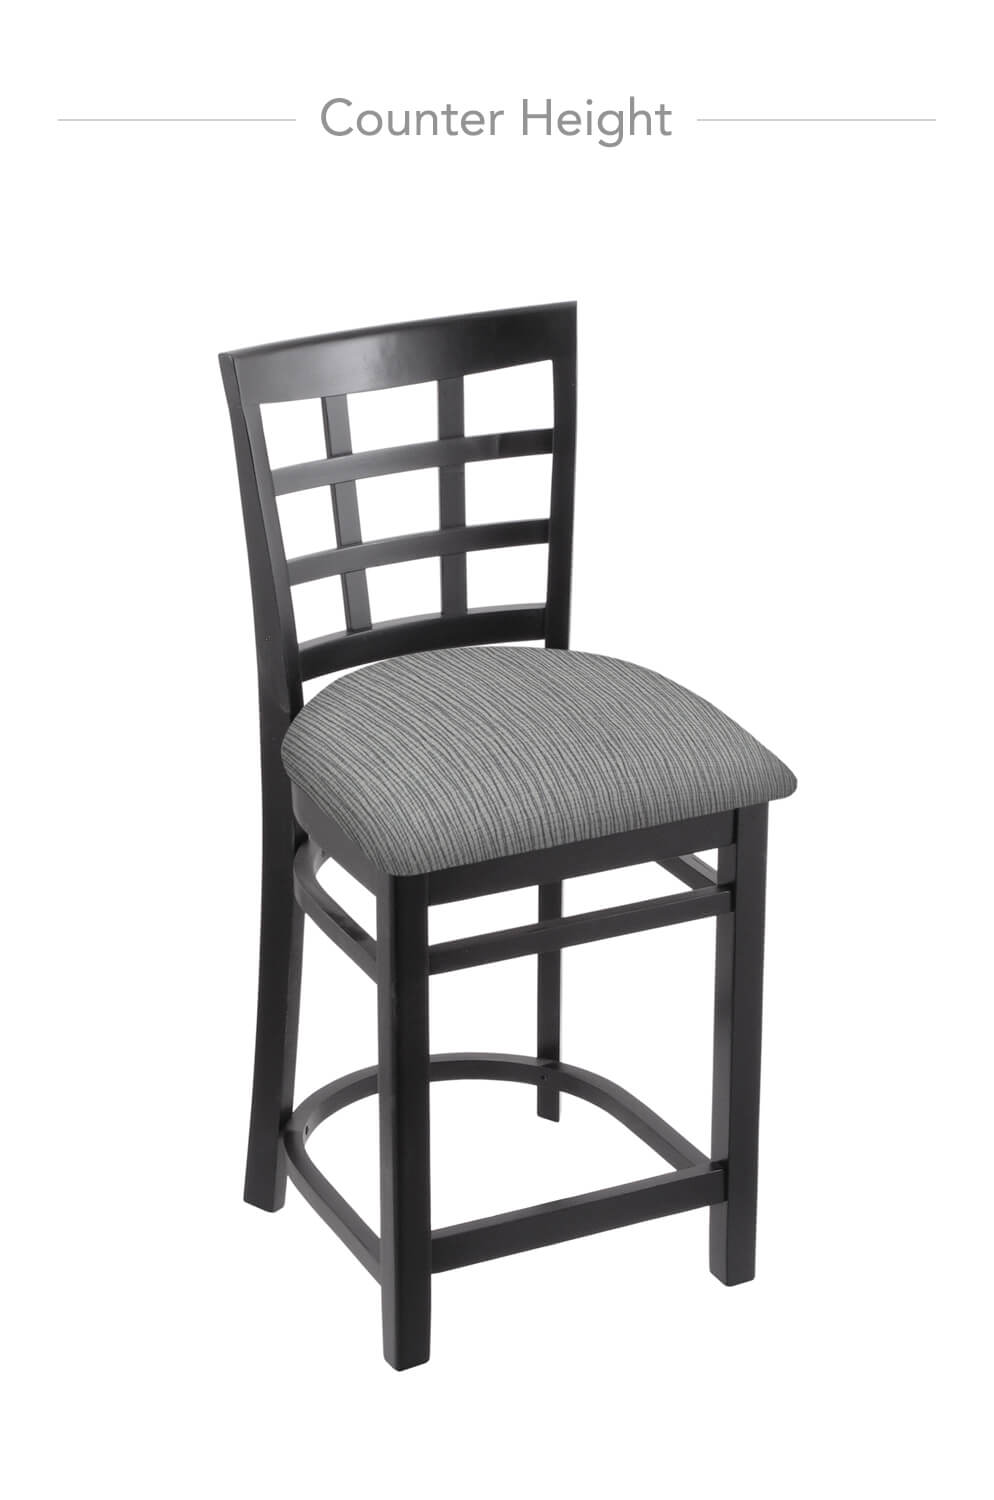 Buy Holland's 3120 Hampton Wood Dining Chair • Multiple Colors!